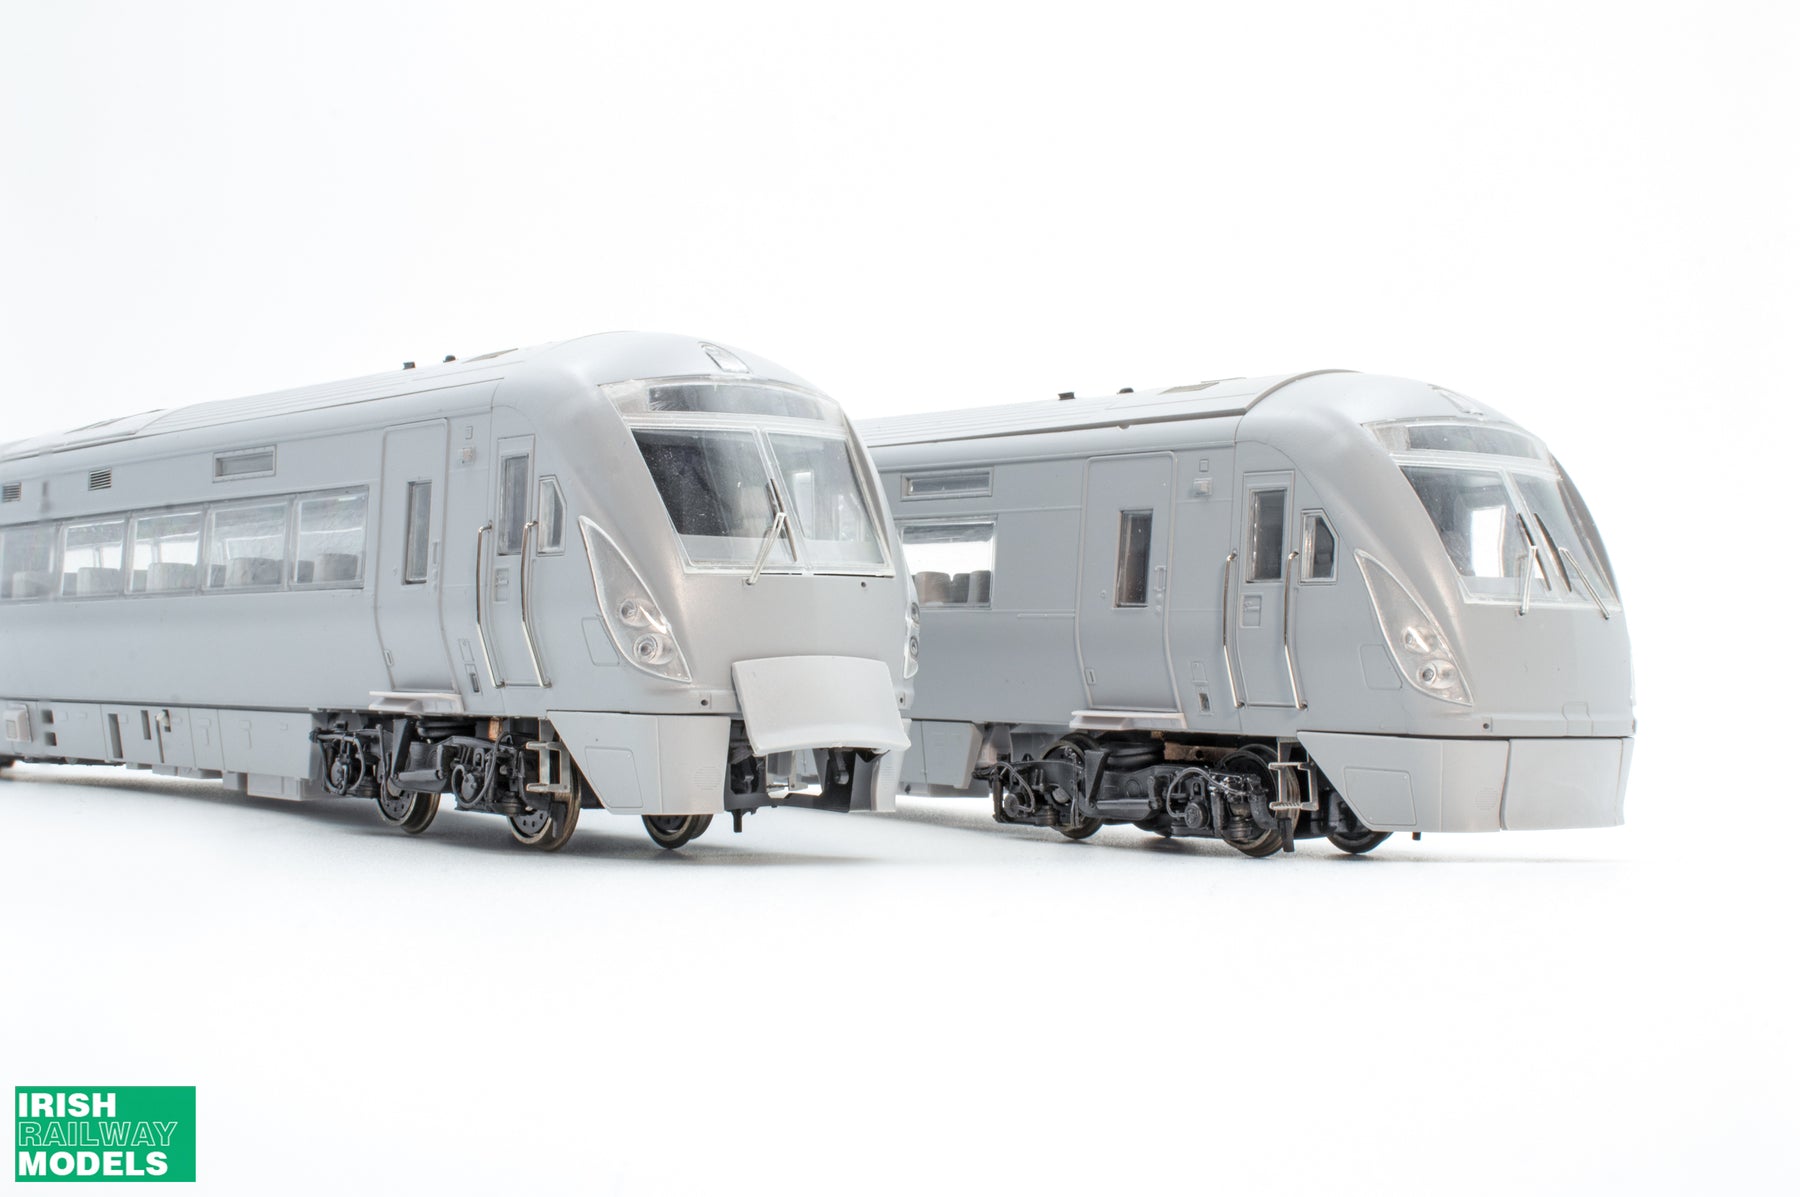 A First Look At Our 22000 Rotem Intercity Railcars